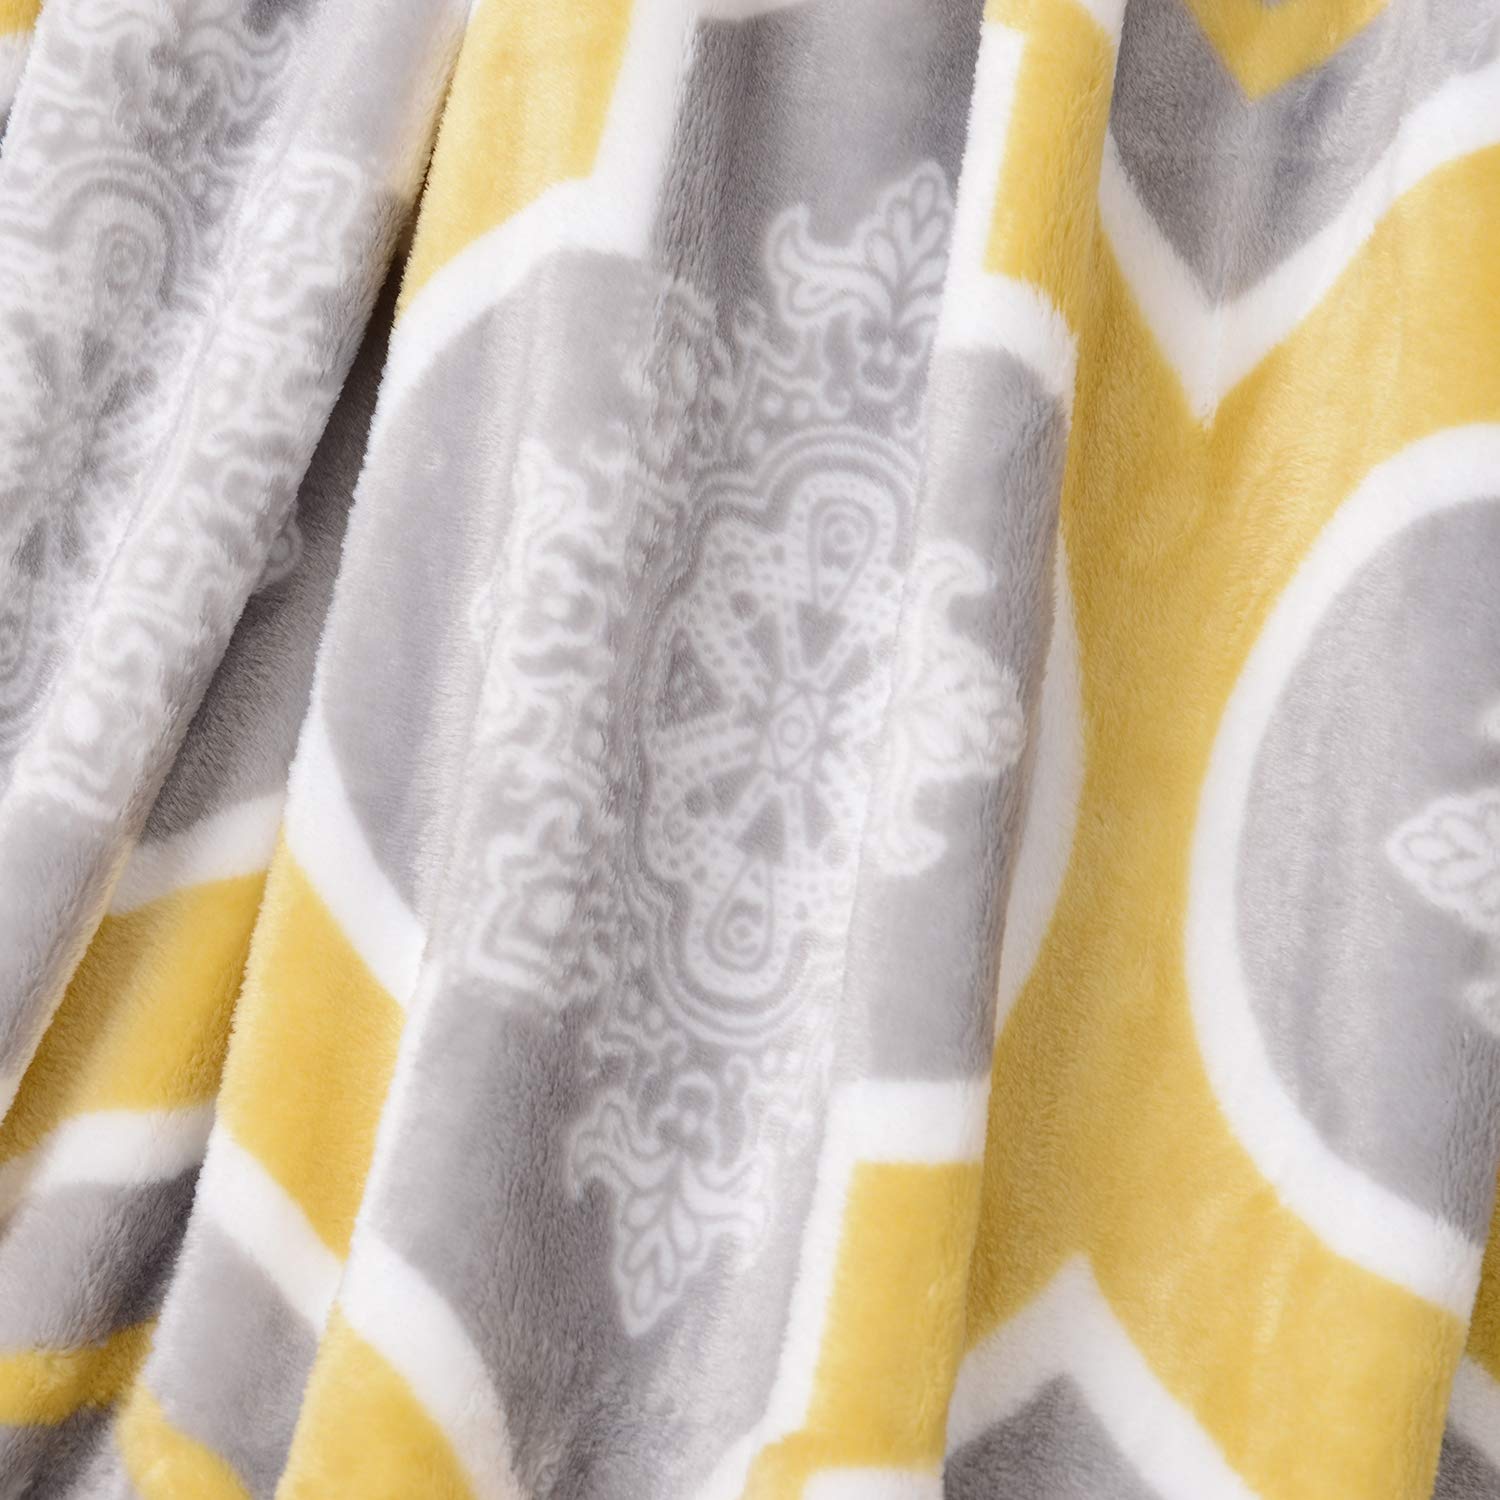 TKM Home Shop Lc Grey Throw Blanket For Queen Size Bed | 80"X60" | Yellow Moroccan Pattern 100% Microfiber Soft Plush Fleece …